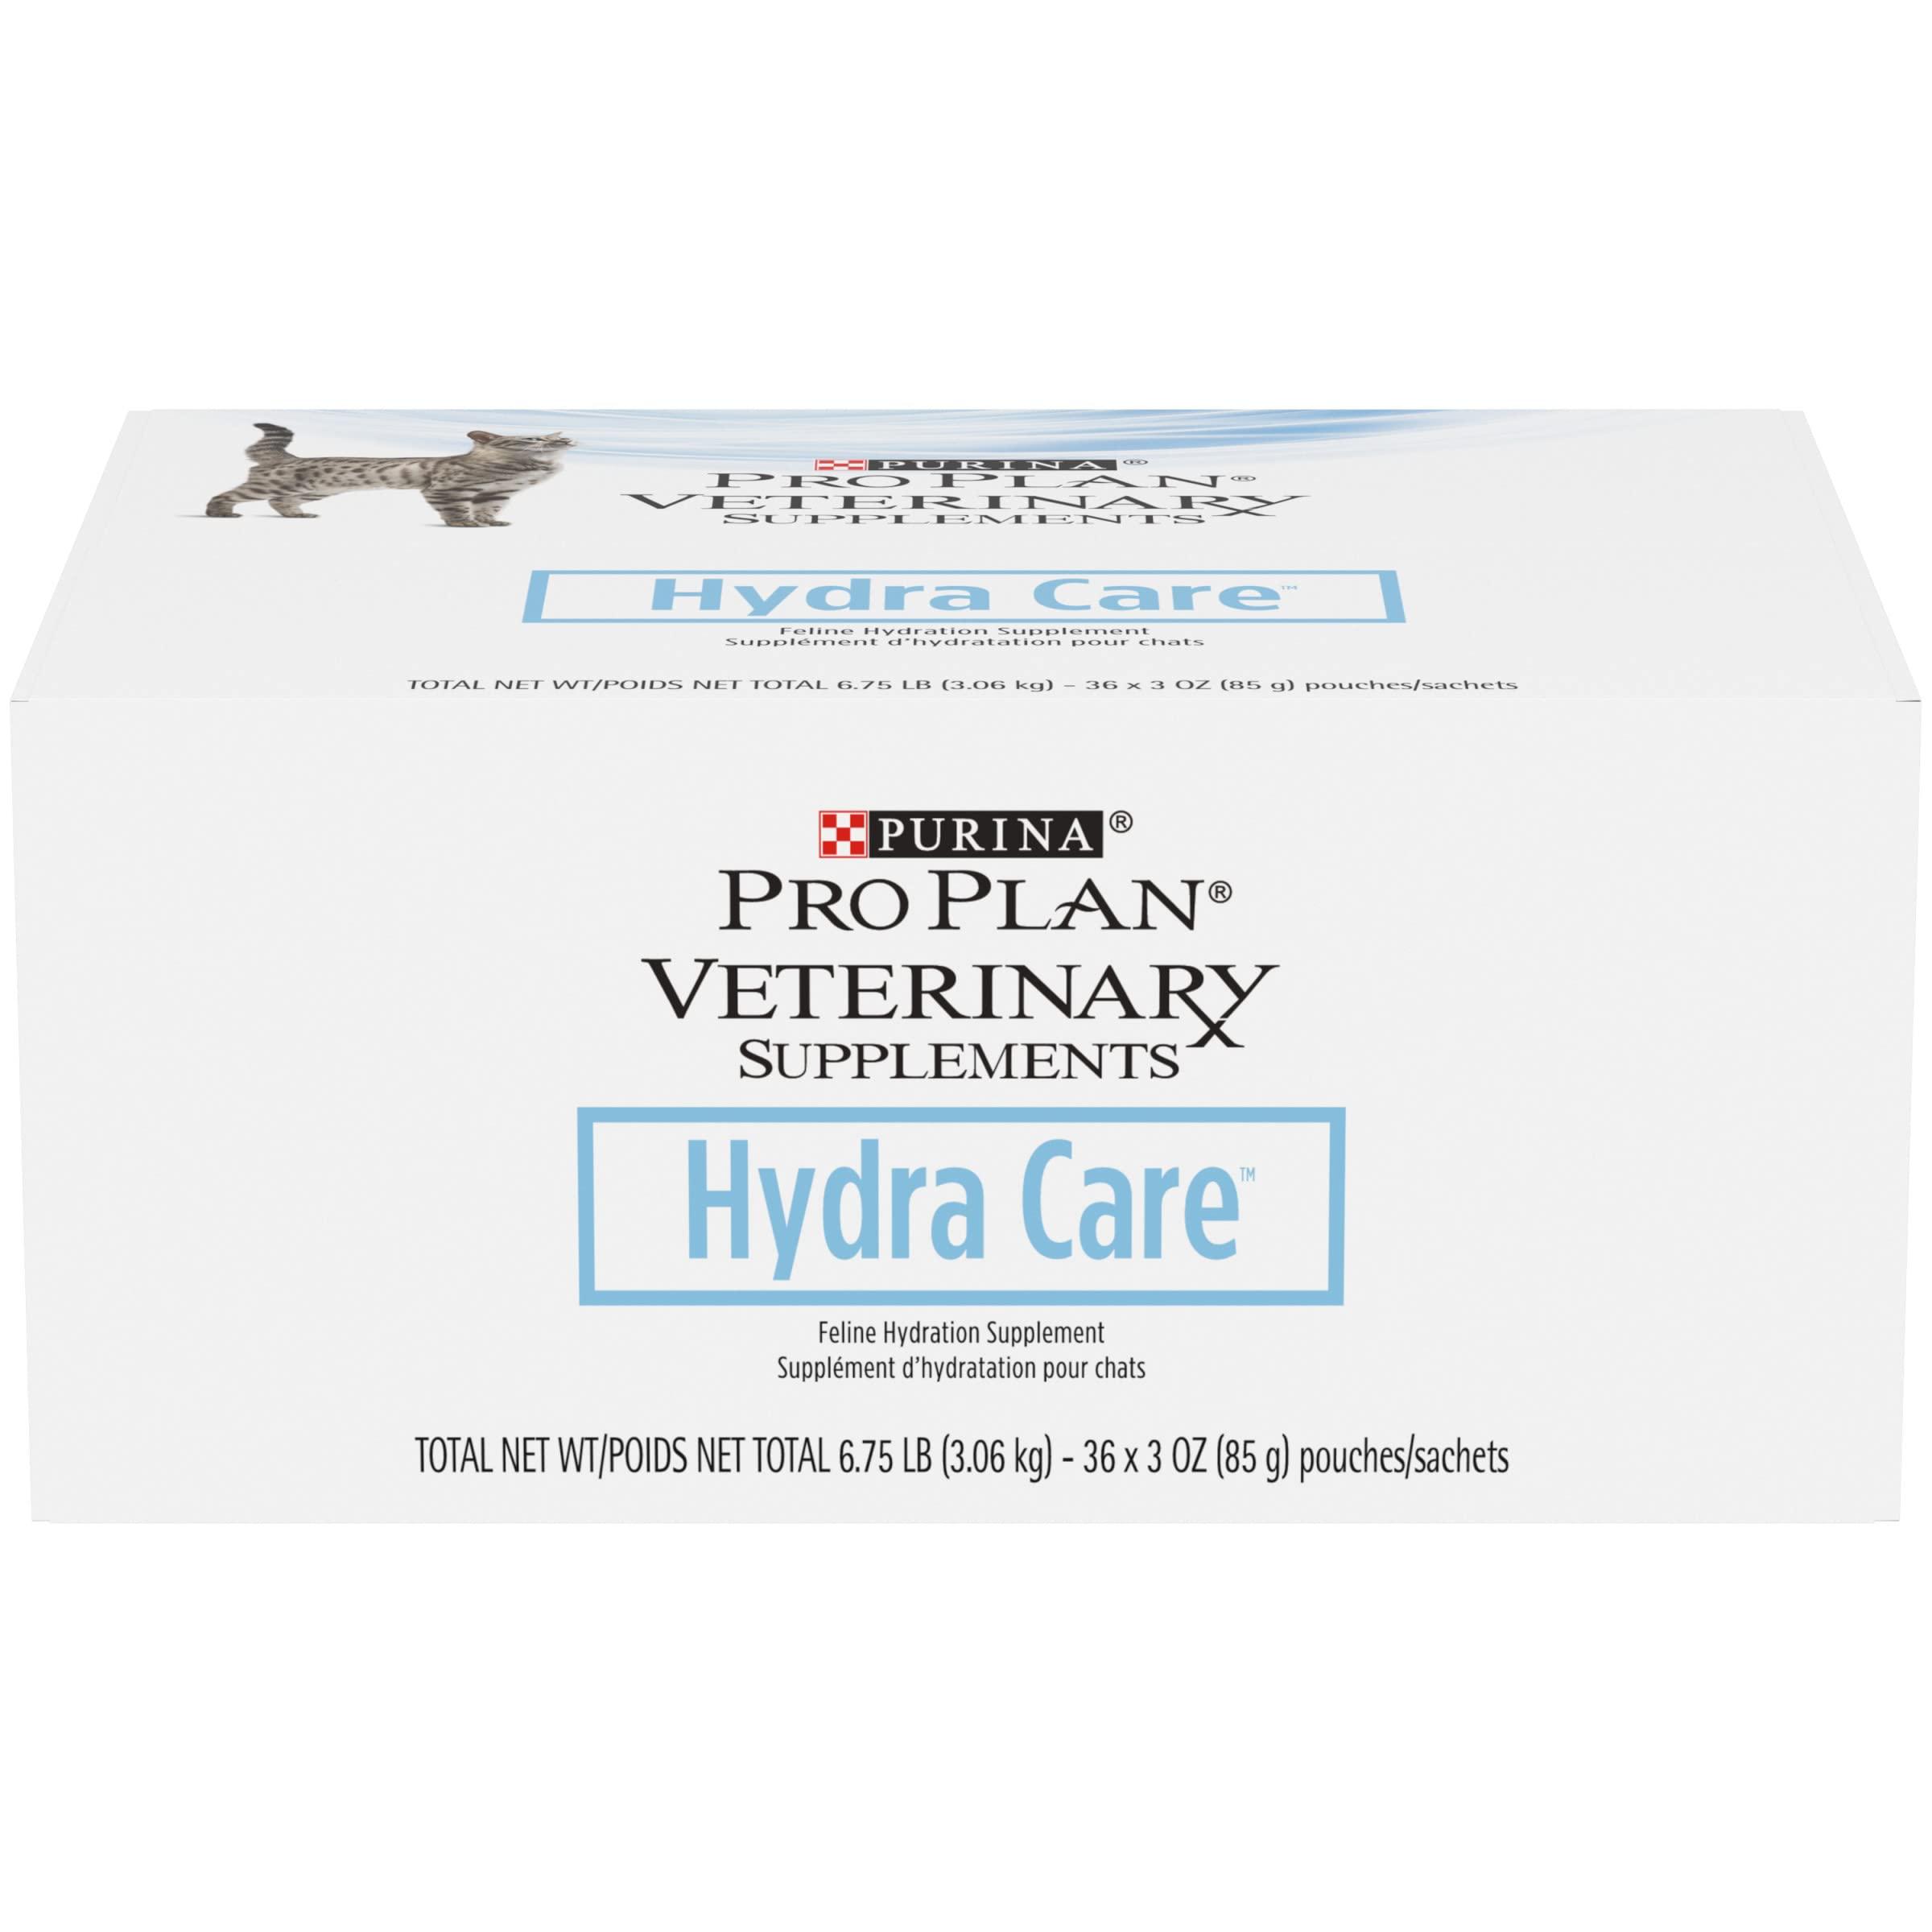 Purina Pro Plan Veterinary Supplements Hydra Care Cat Supplements - (36) 3 Oz Pouches